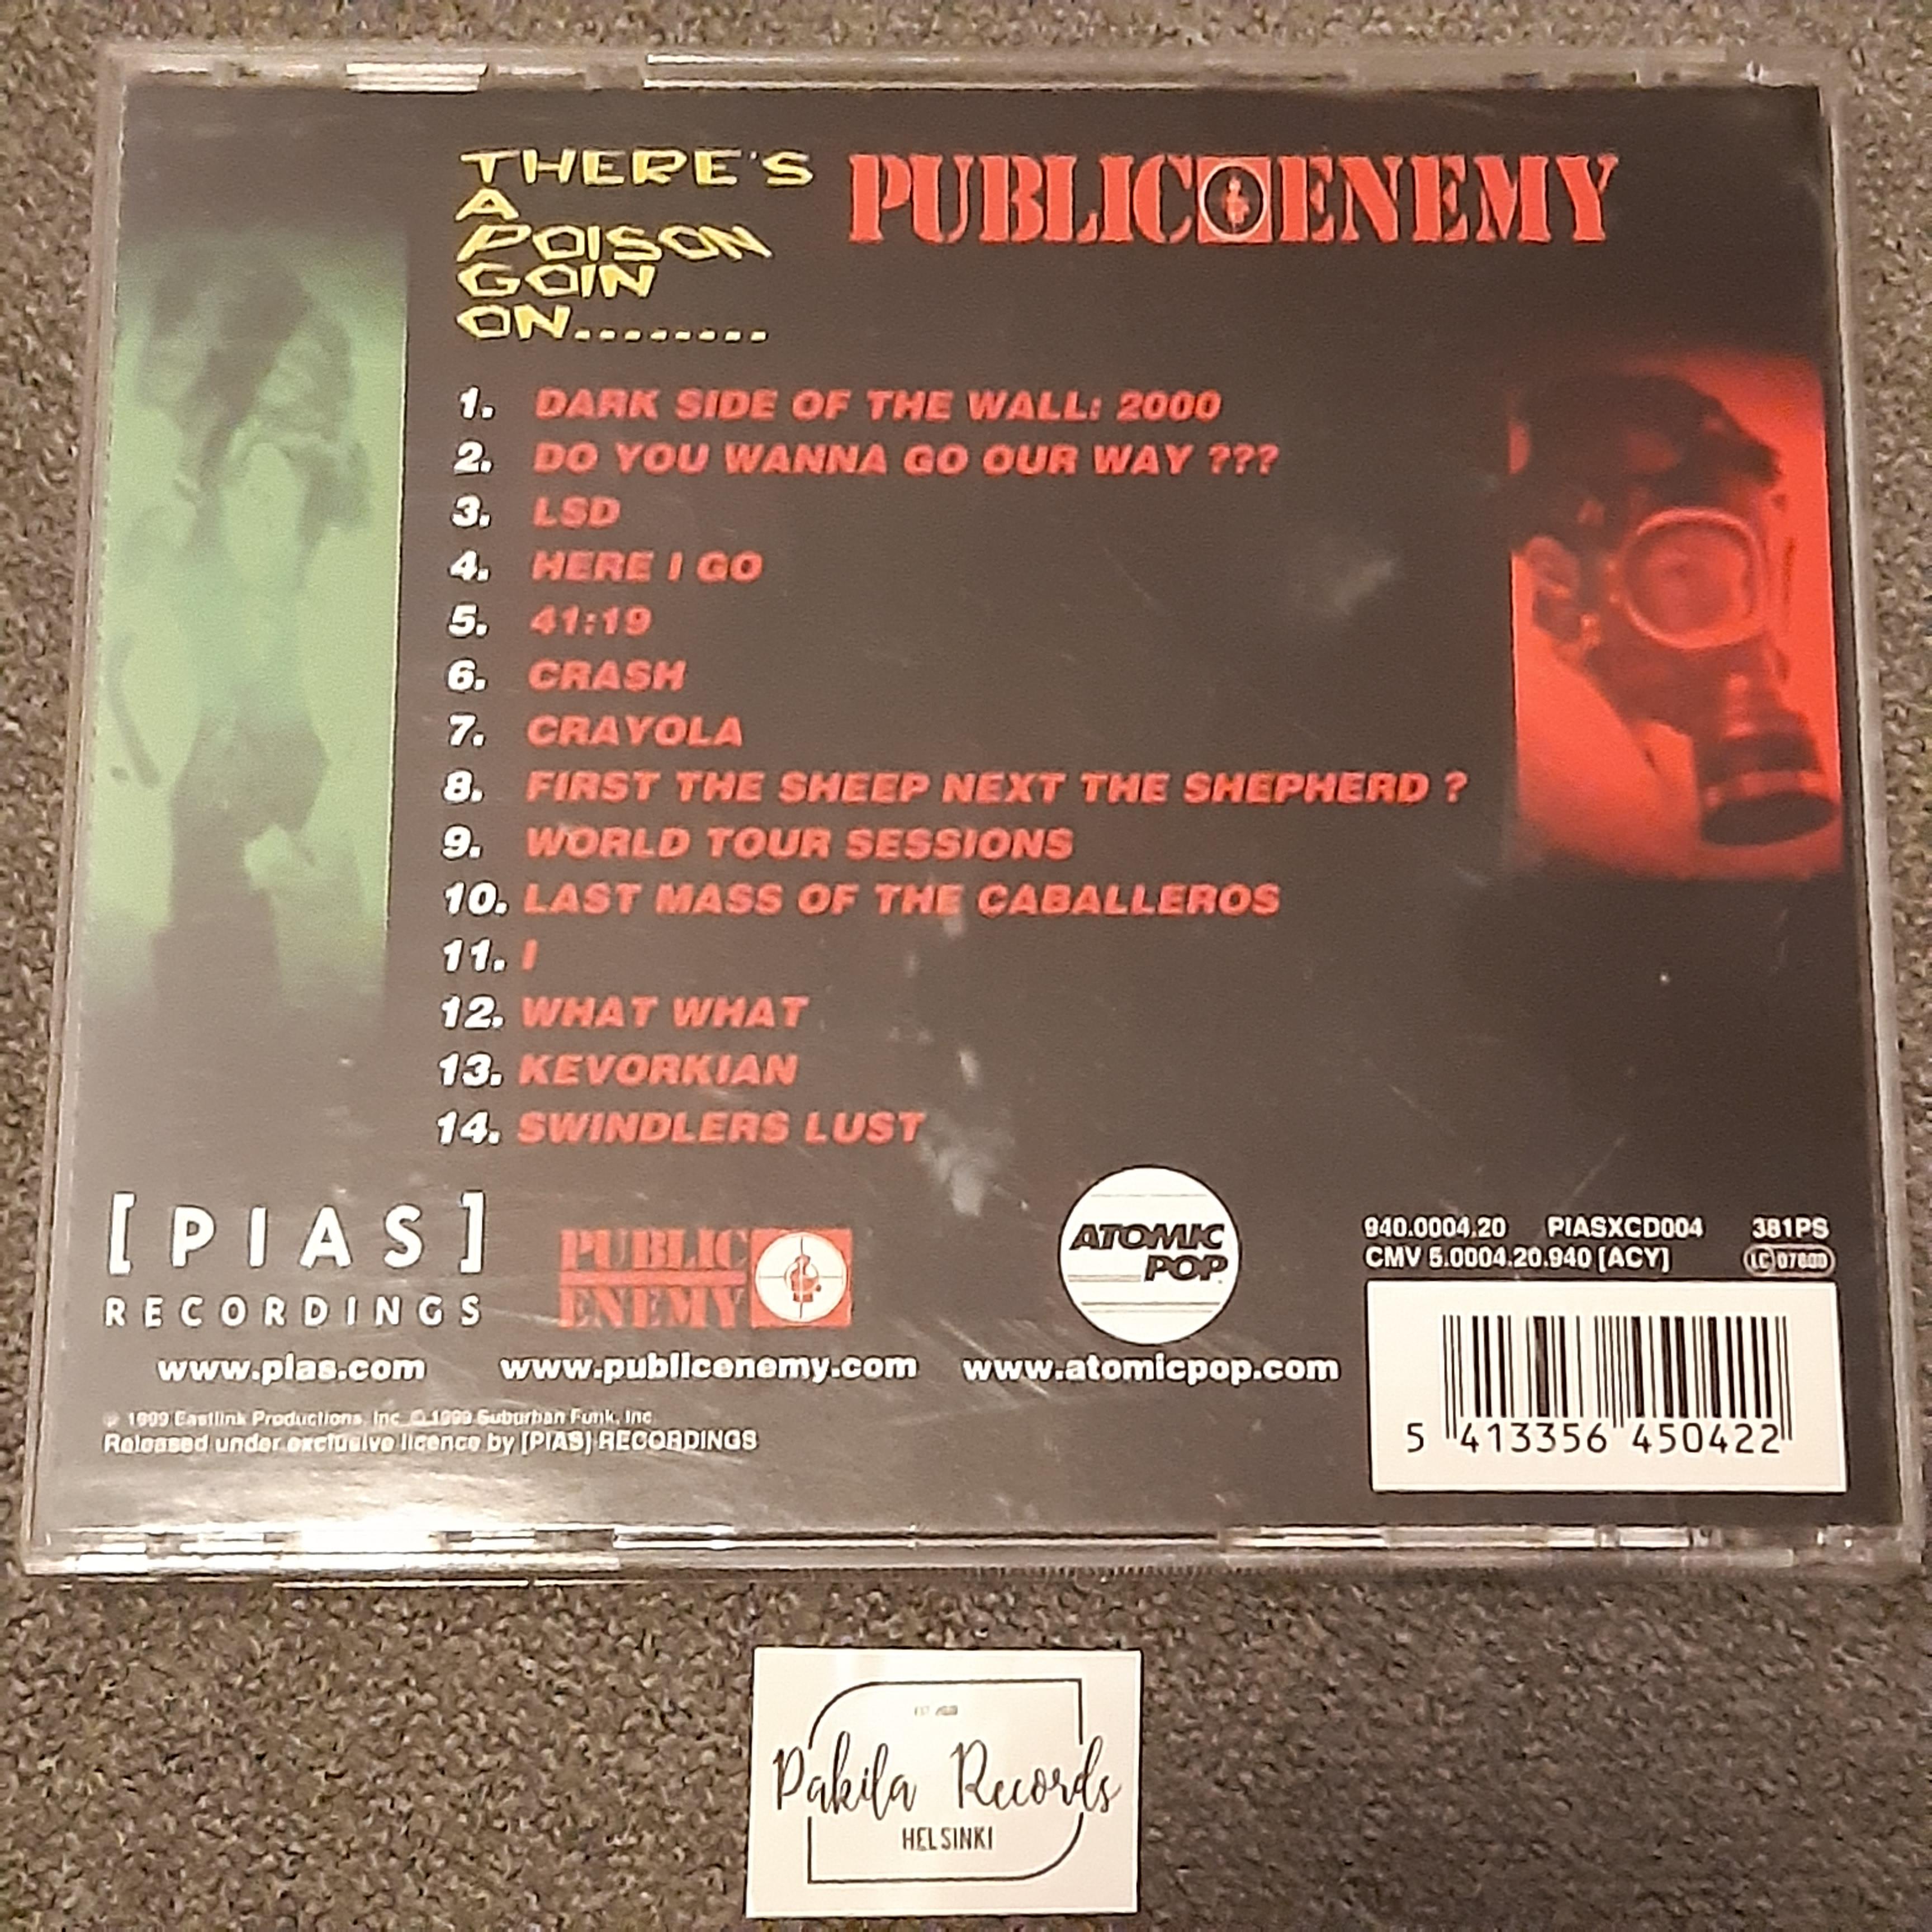 Public Enemy - There's A Poison Goin On.... - CD (käytetty)